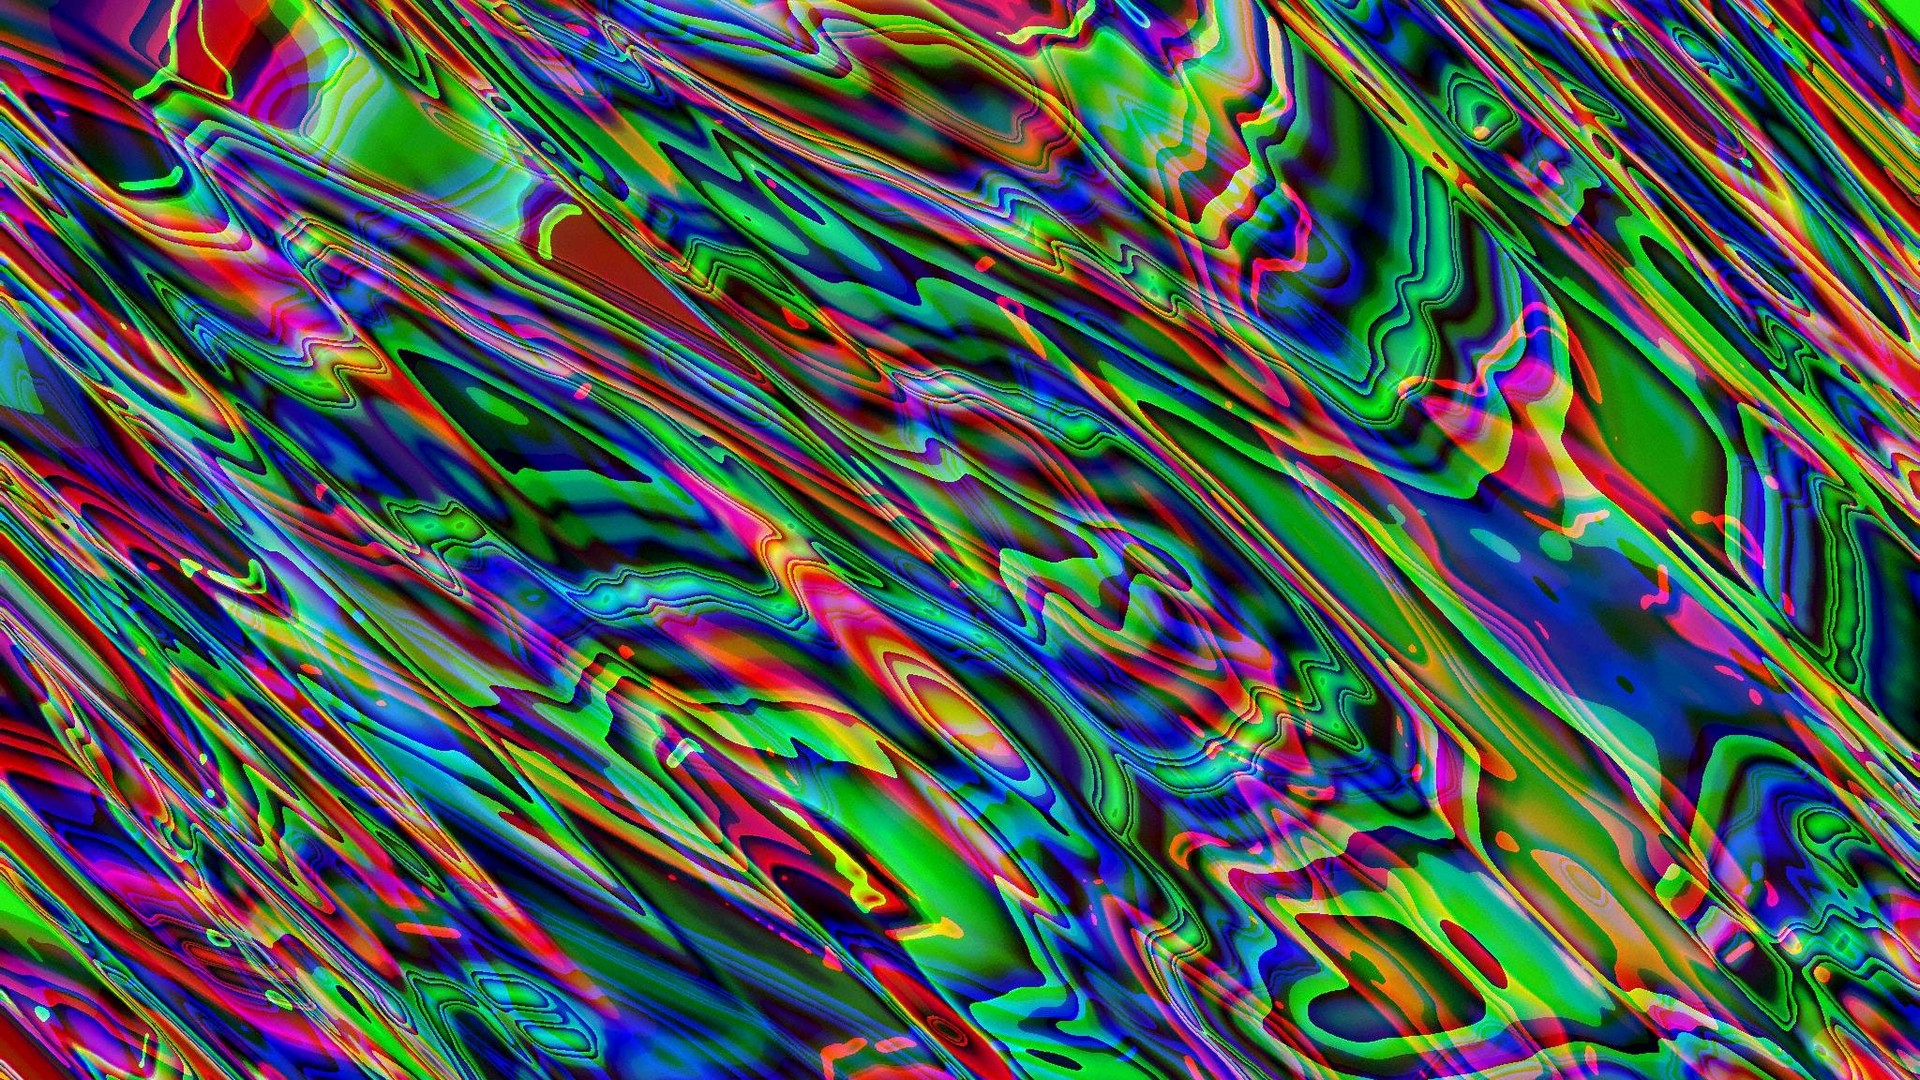 Trippy Colorful HD Backgrounds With Resolution 1920X1080